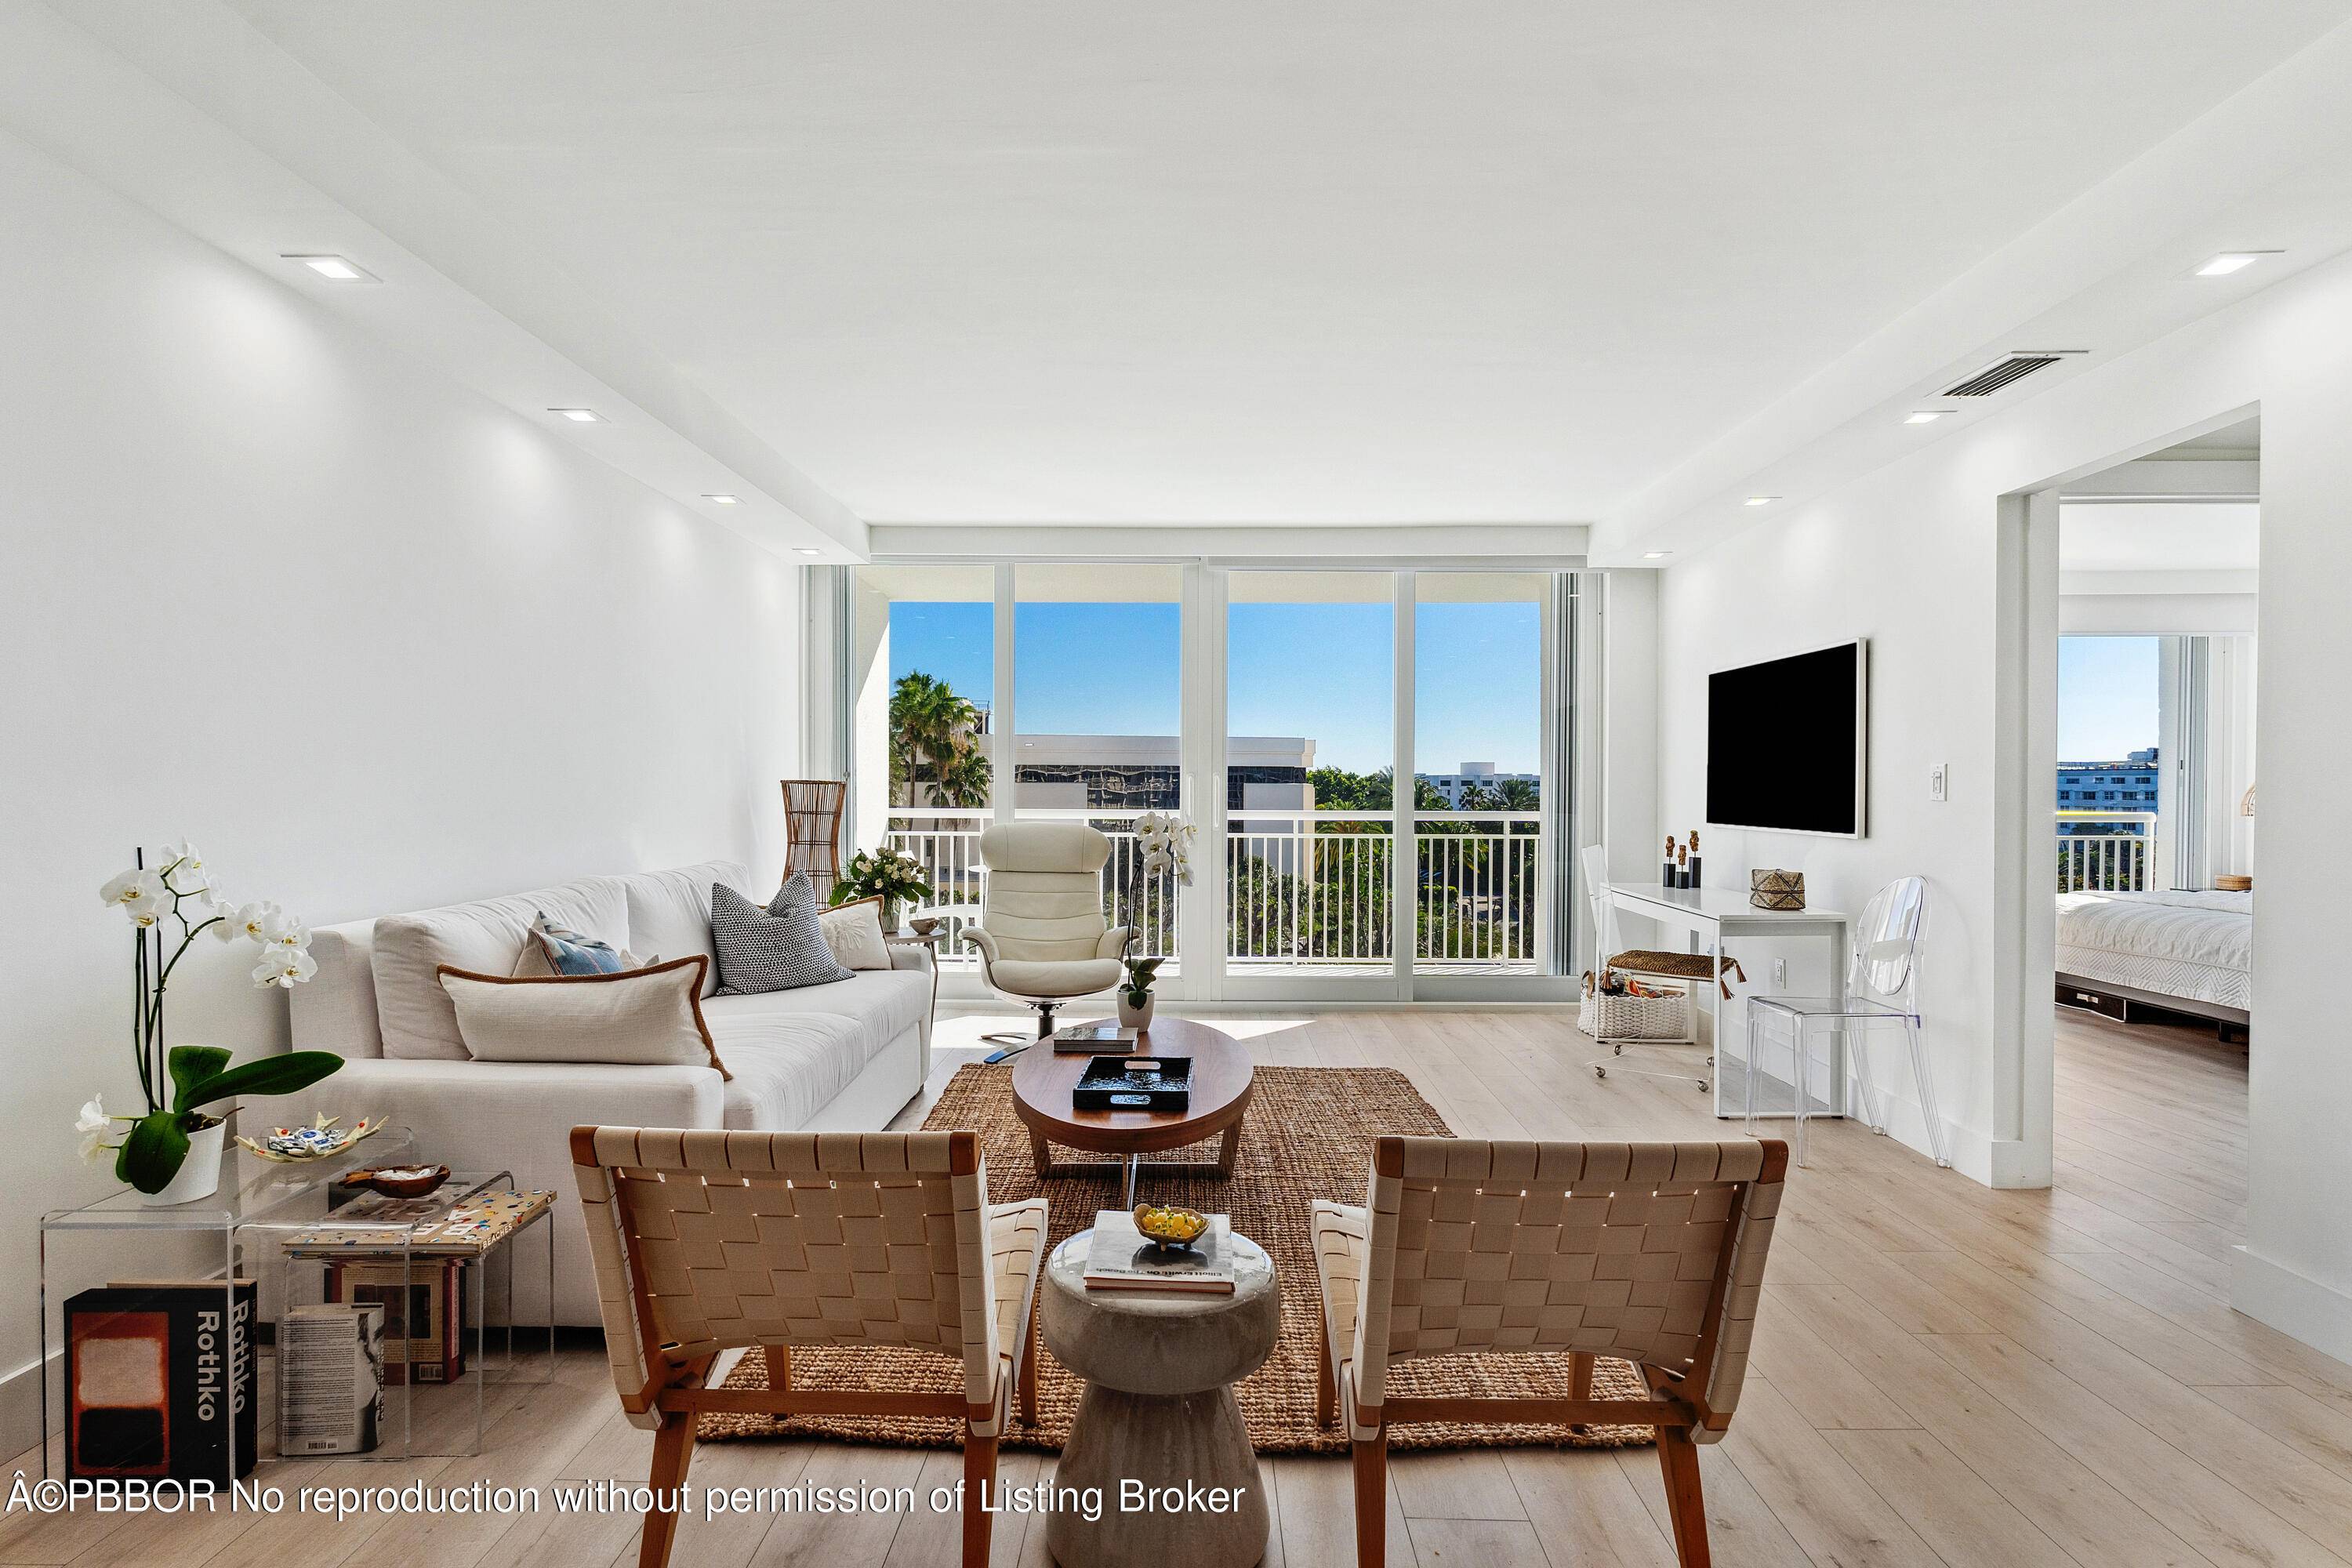 Beautifully Renovated and Newly Furnished apartment in Ambassador II, located next to the Four Seasons Resort in Palm Beach.